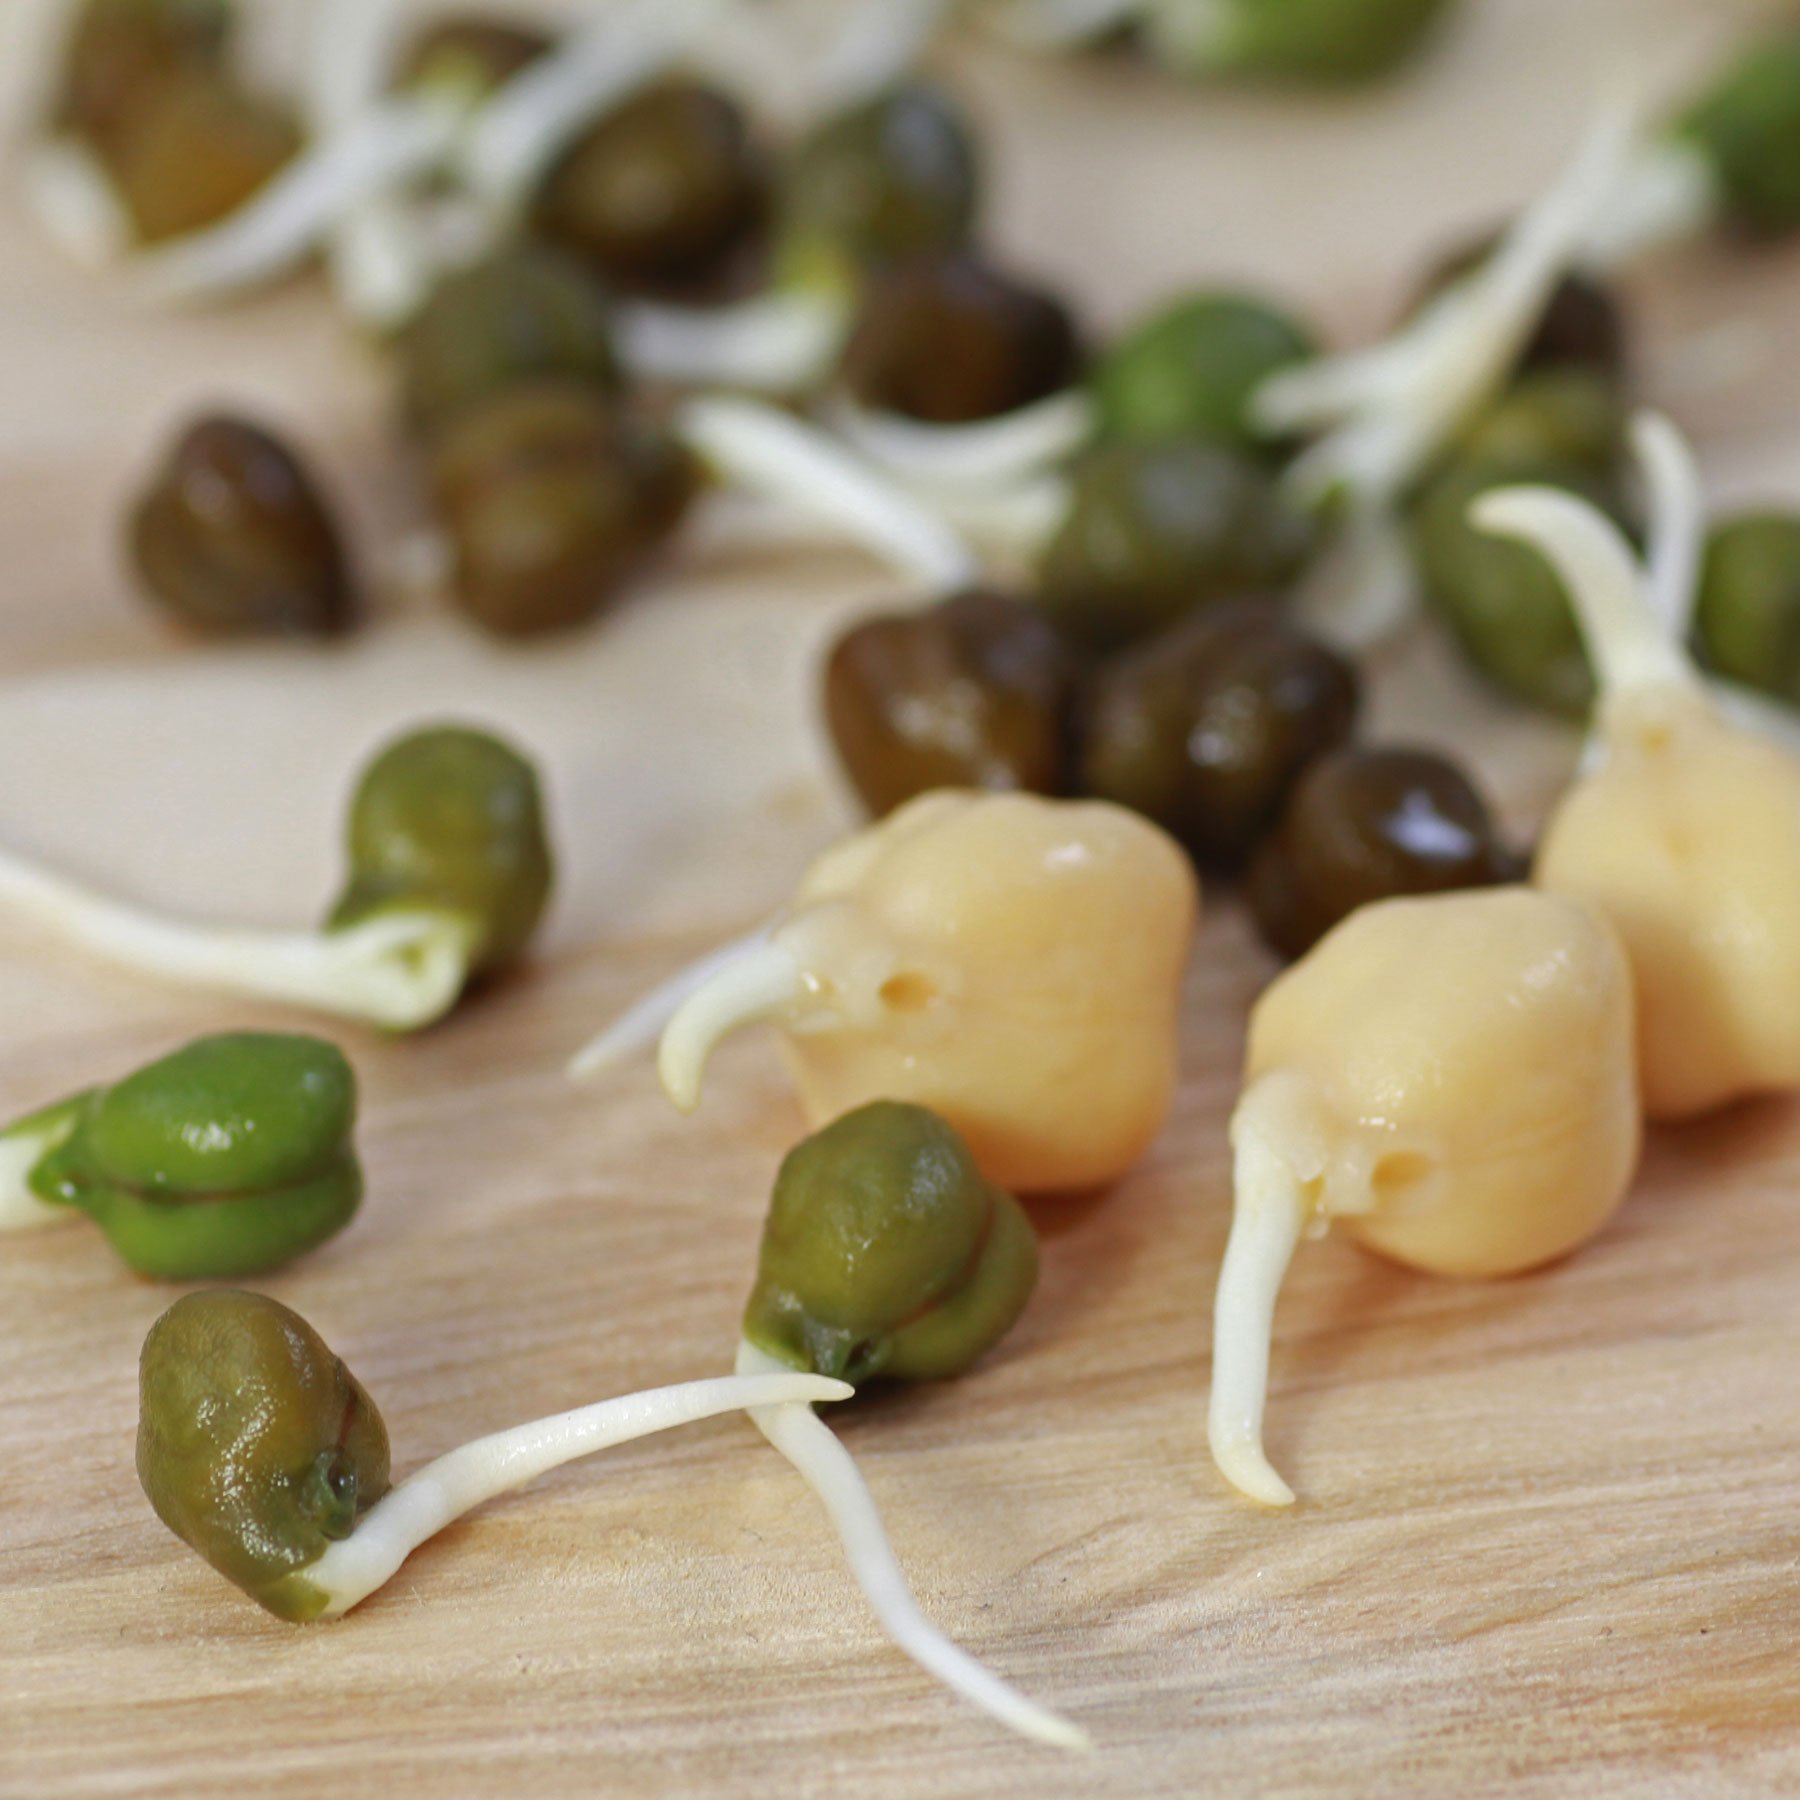 Chickpea sprouts